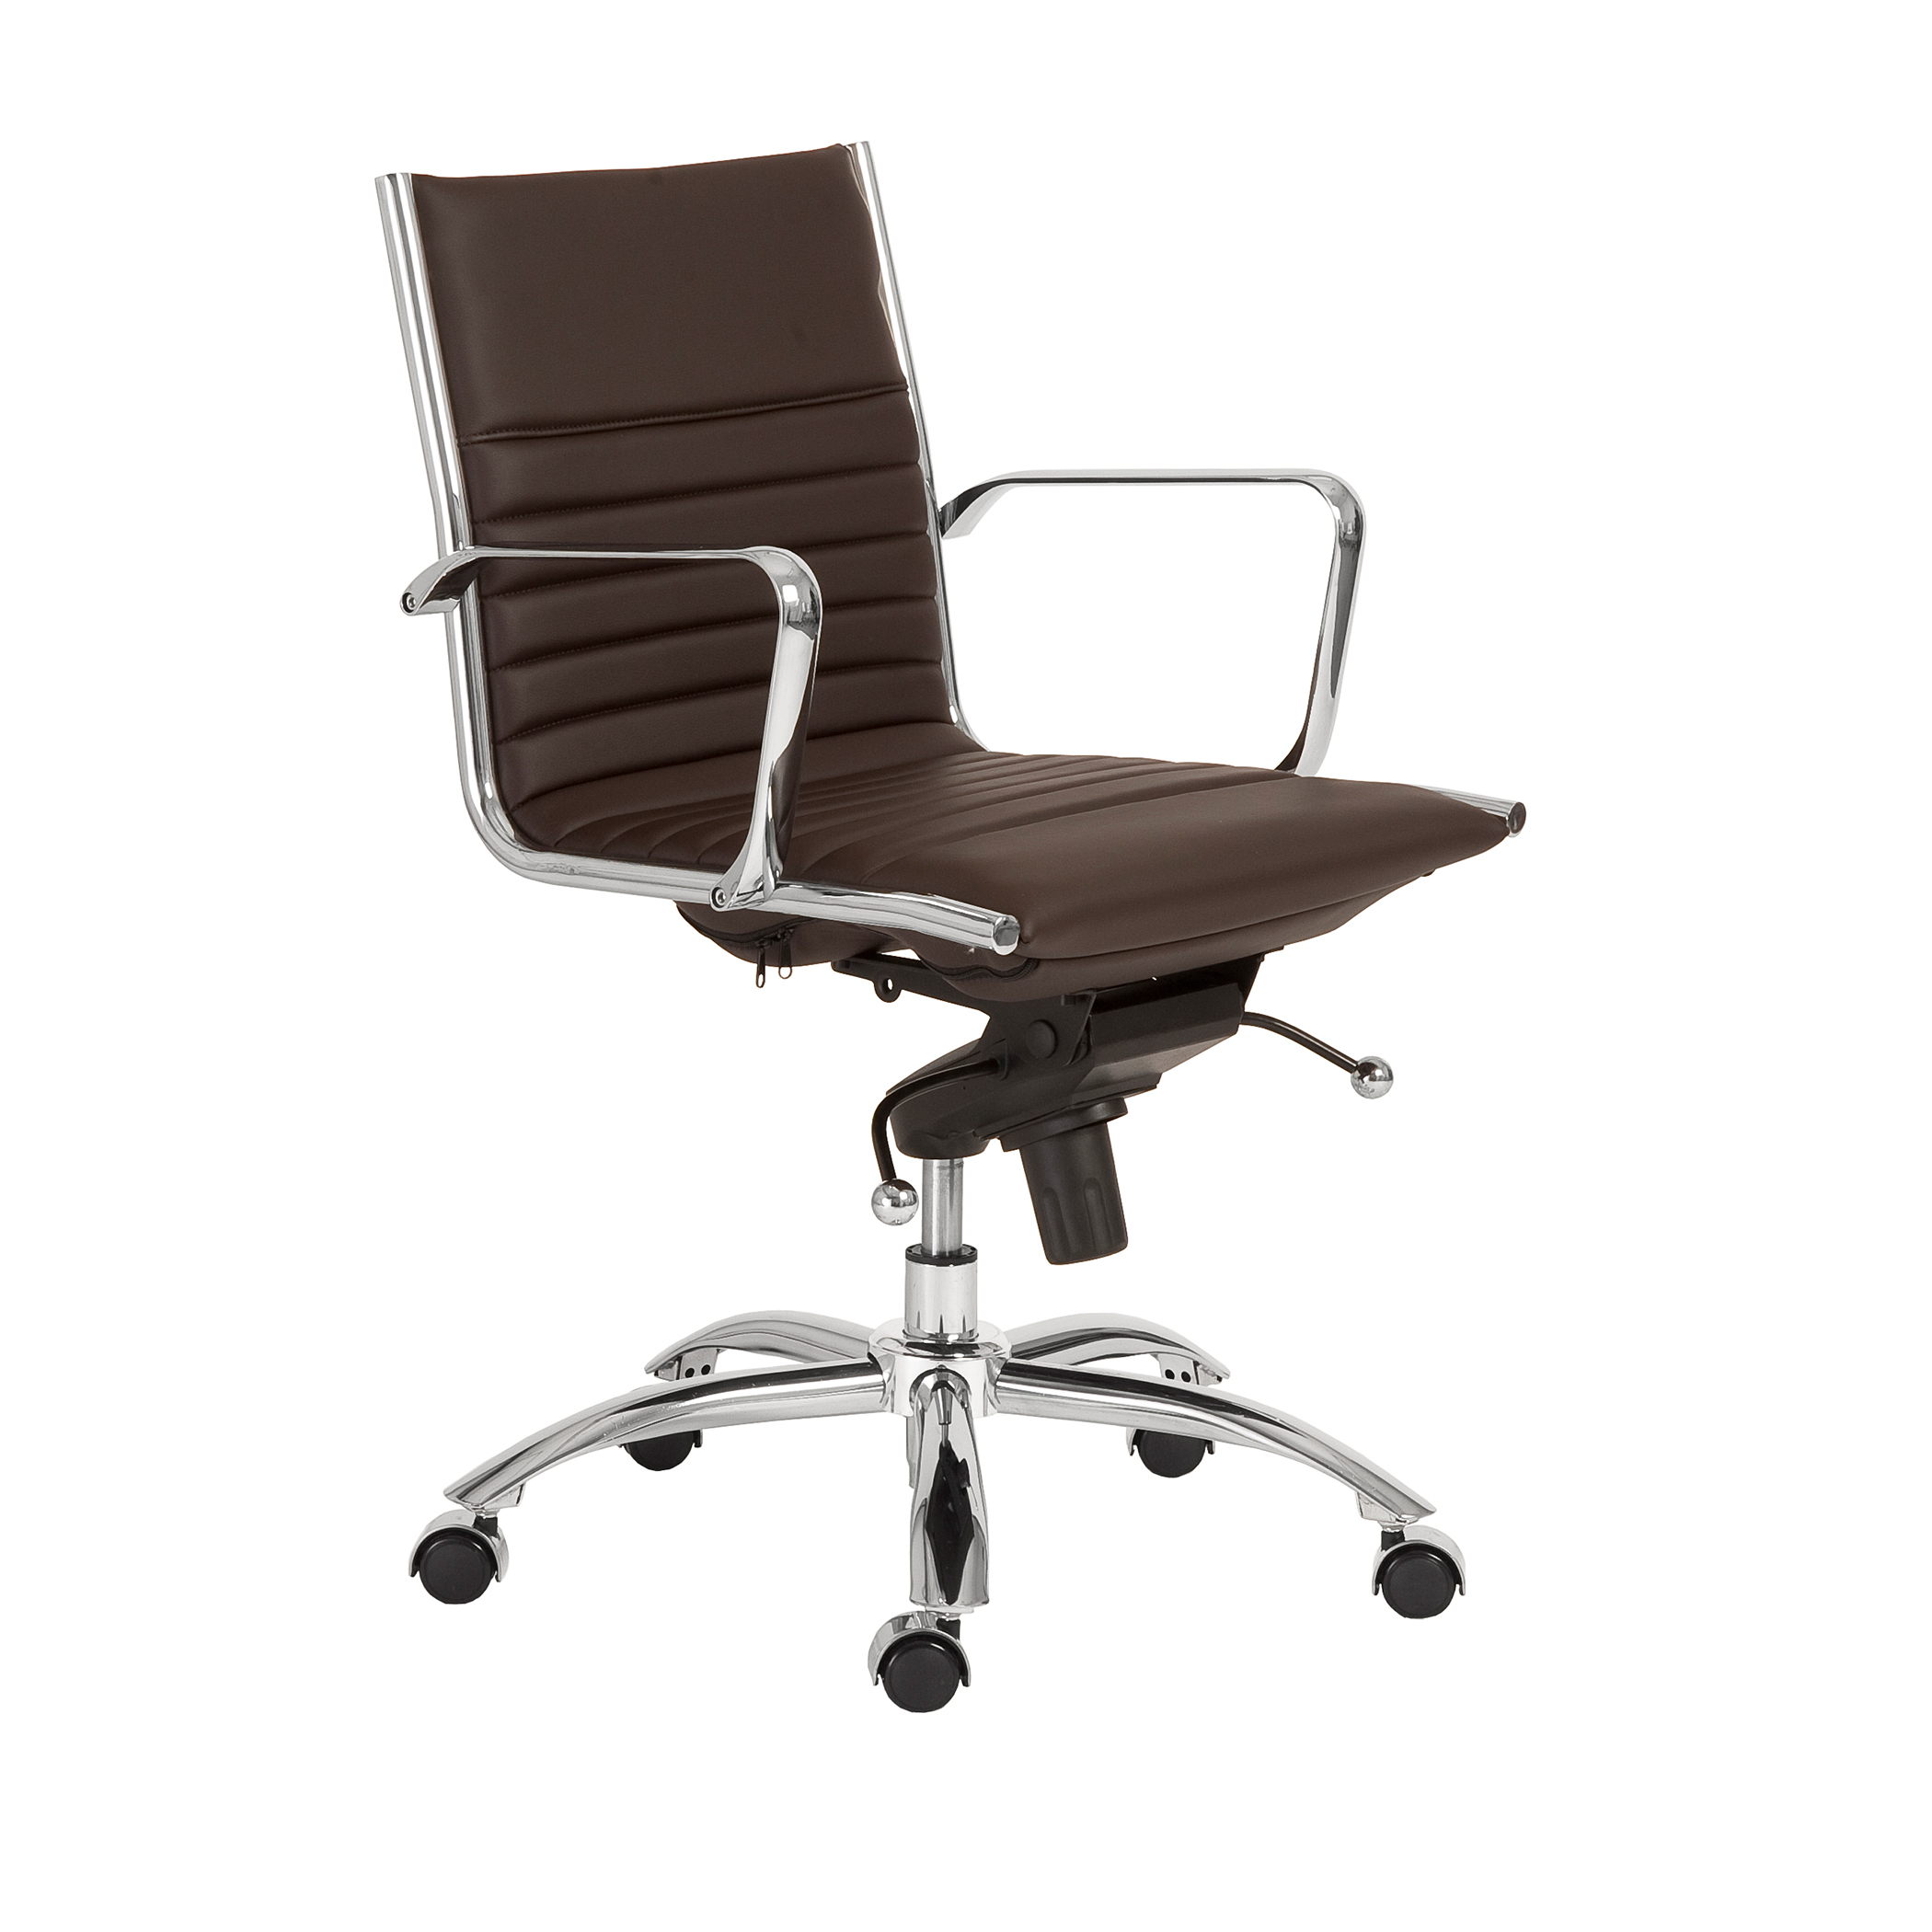 Dirk Low Back Office Chair in brown soft leatherette and chromed aluminum armrests shown here.